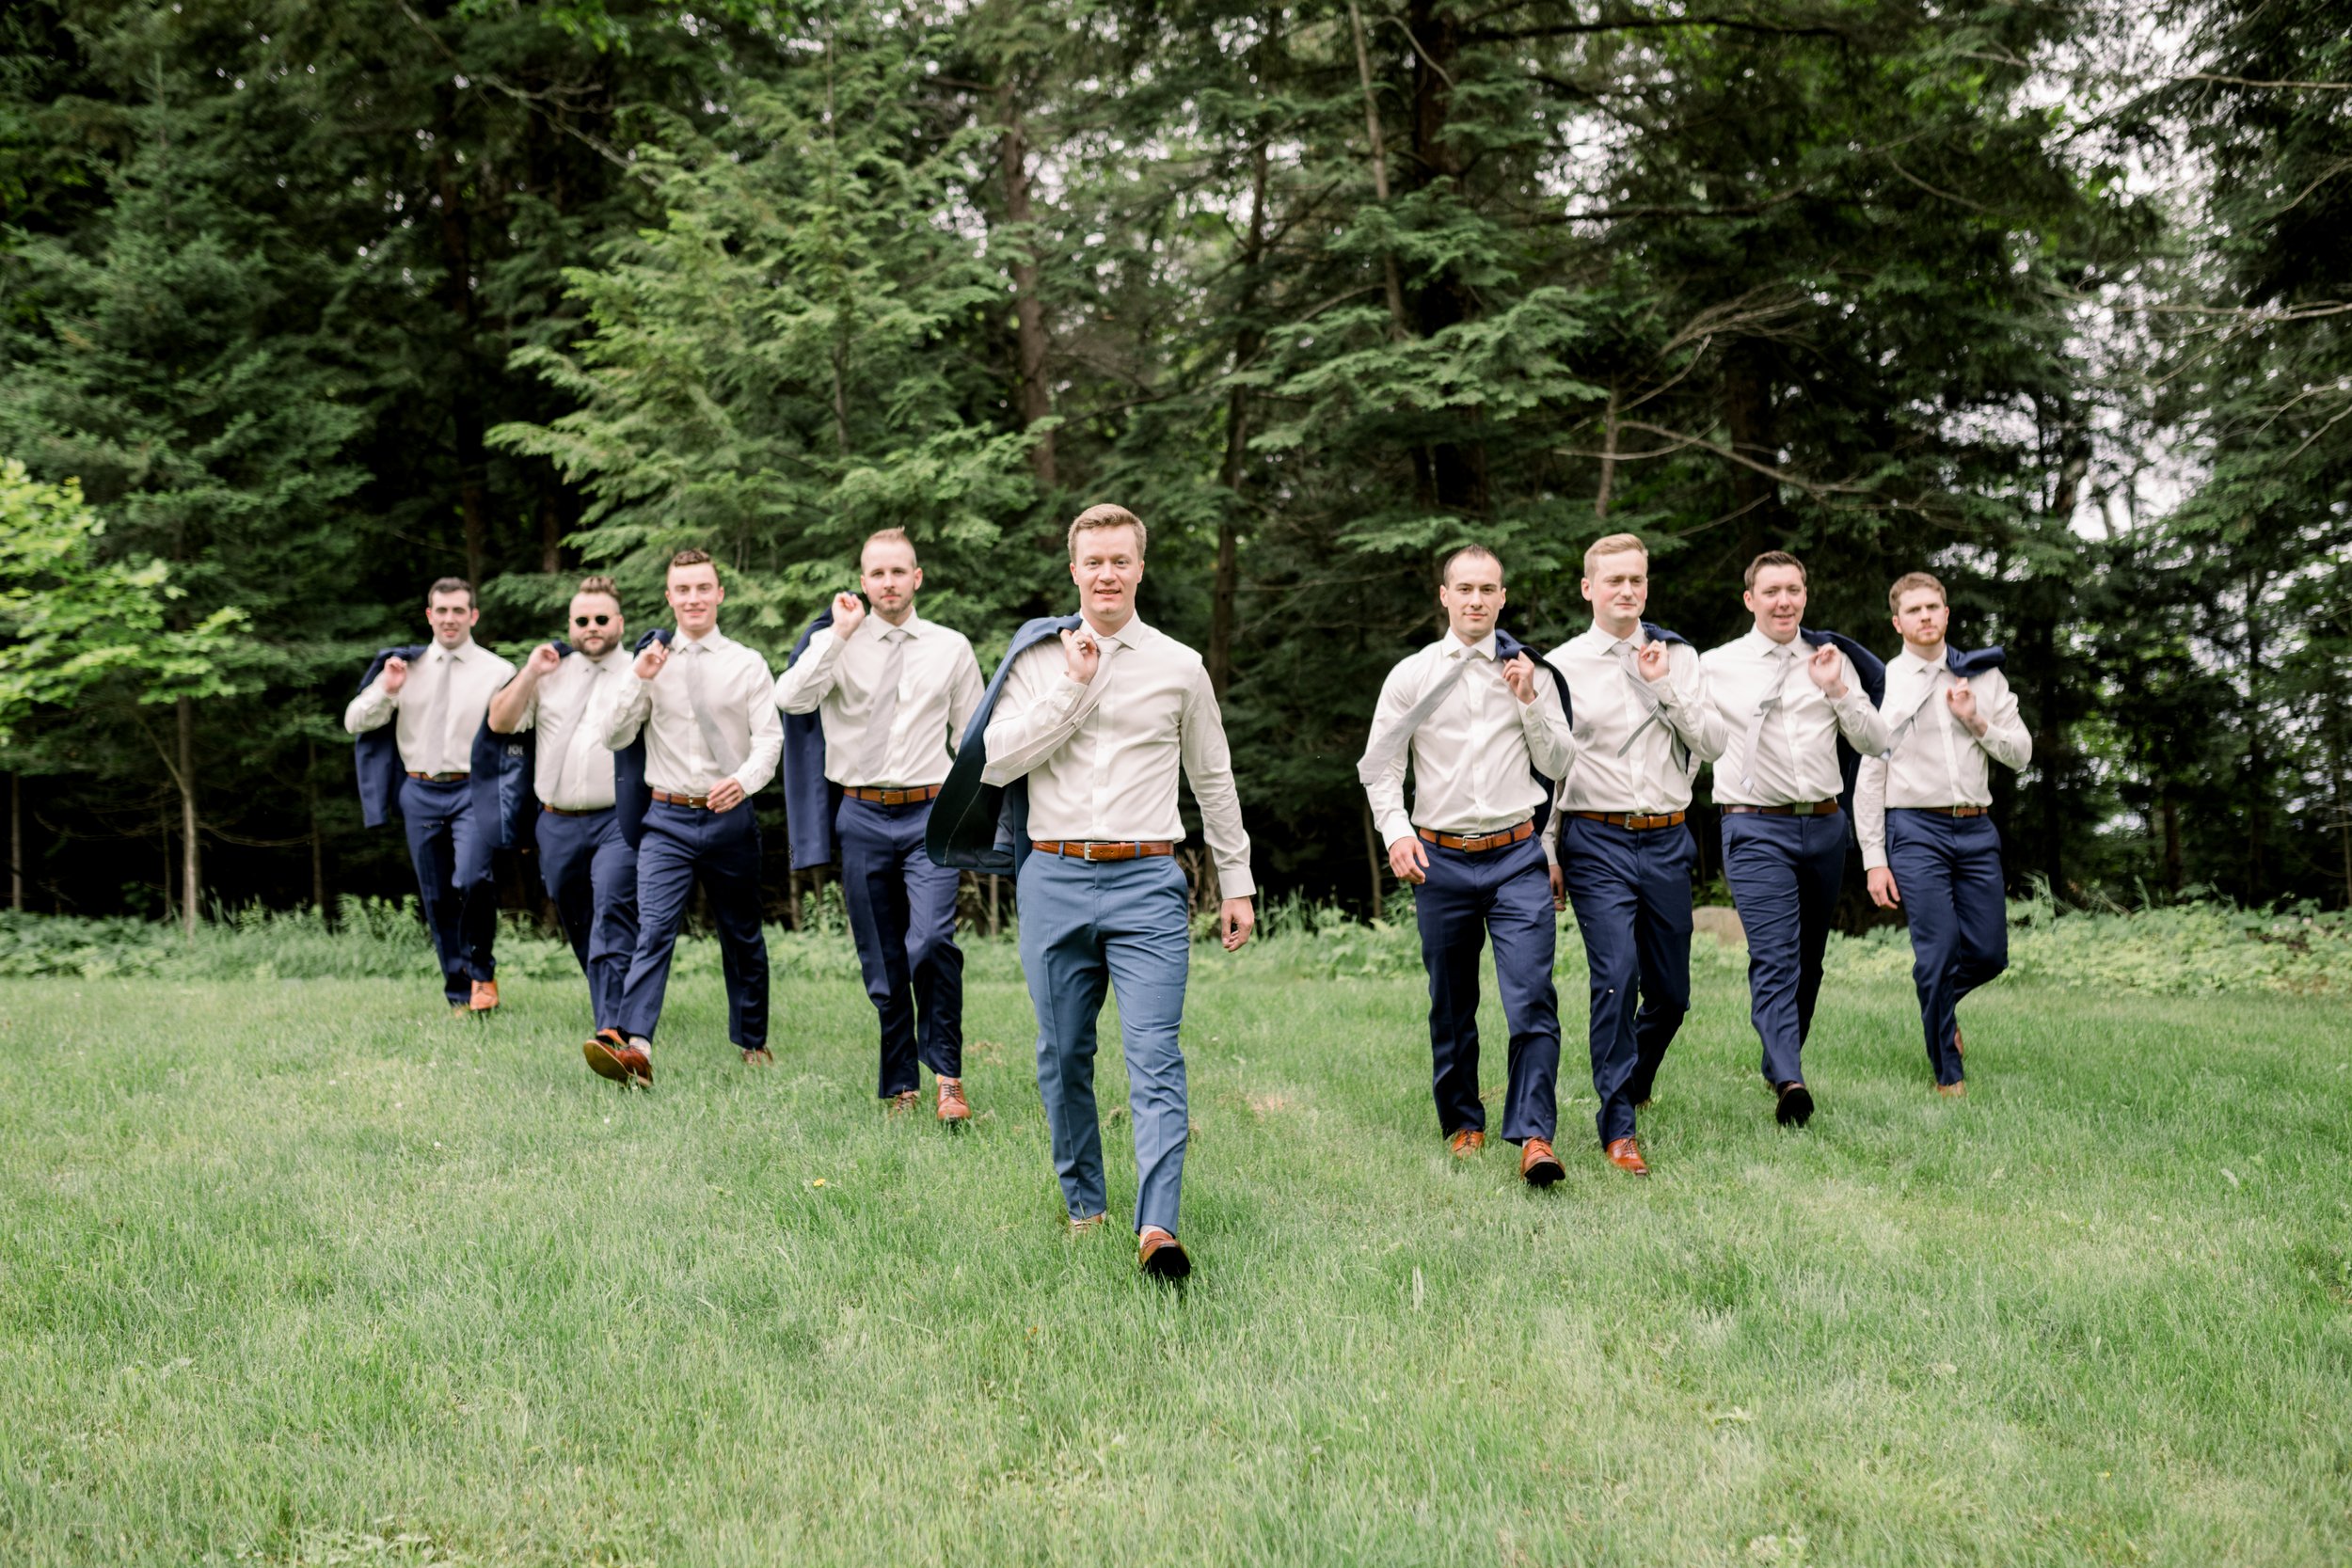  Groom and groomsmen walk with coats over their shoulders by Chelsea Mason Photography in Ontario. groomsmen style portrait blue suit #chelseamasonphotography #chelseamasonweddings #Ontarioweddings #Boulterweddingphotographer #laceweddinggown 